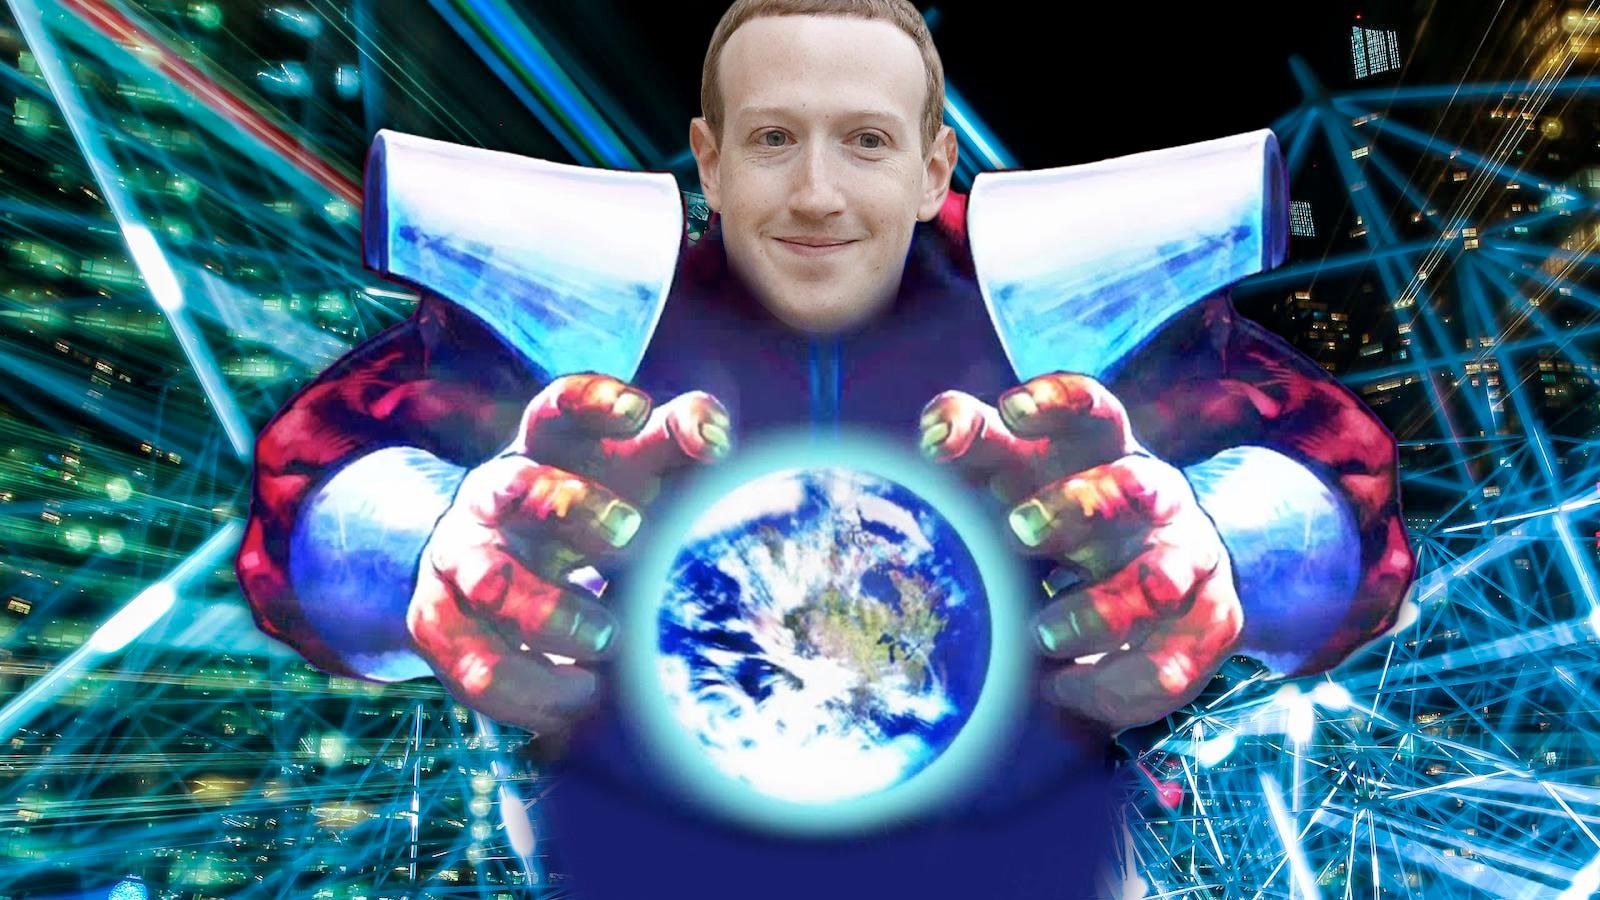 Mark Zuckerberg of Meta as M.Bison with his hands grasping the world